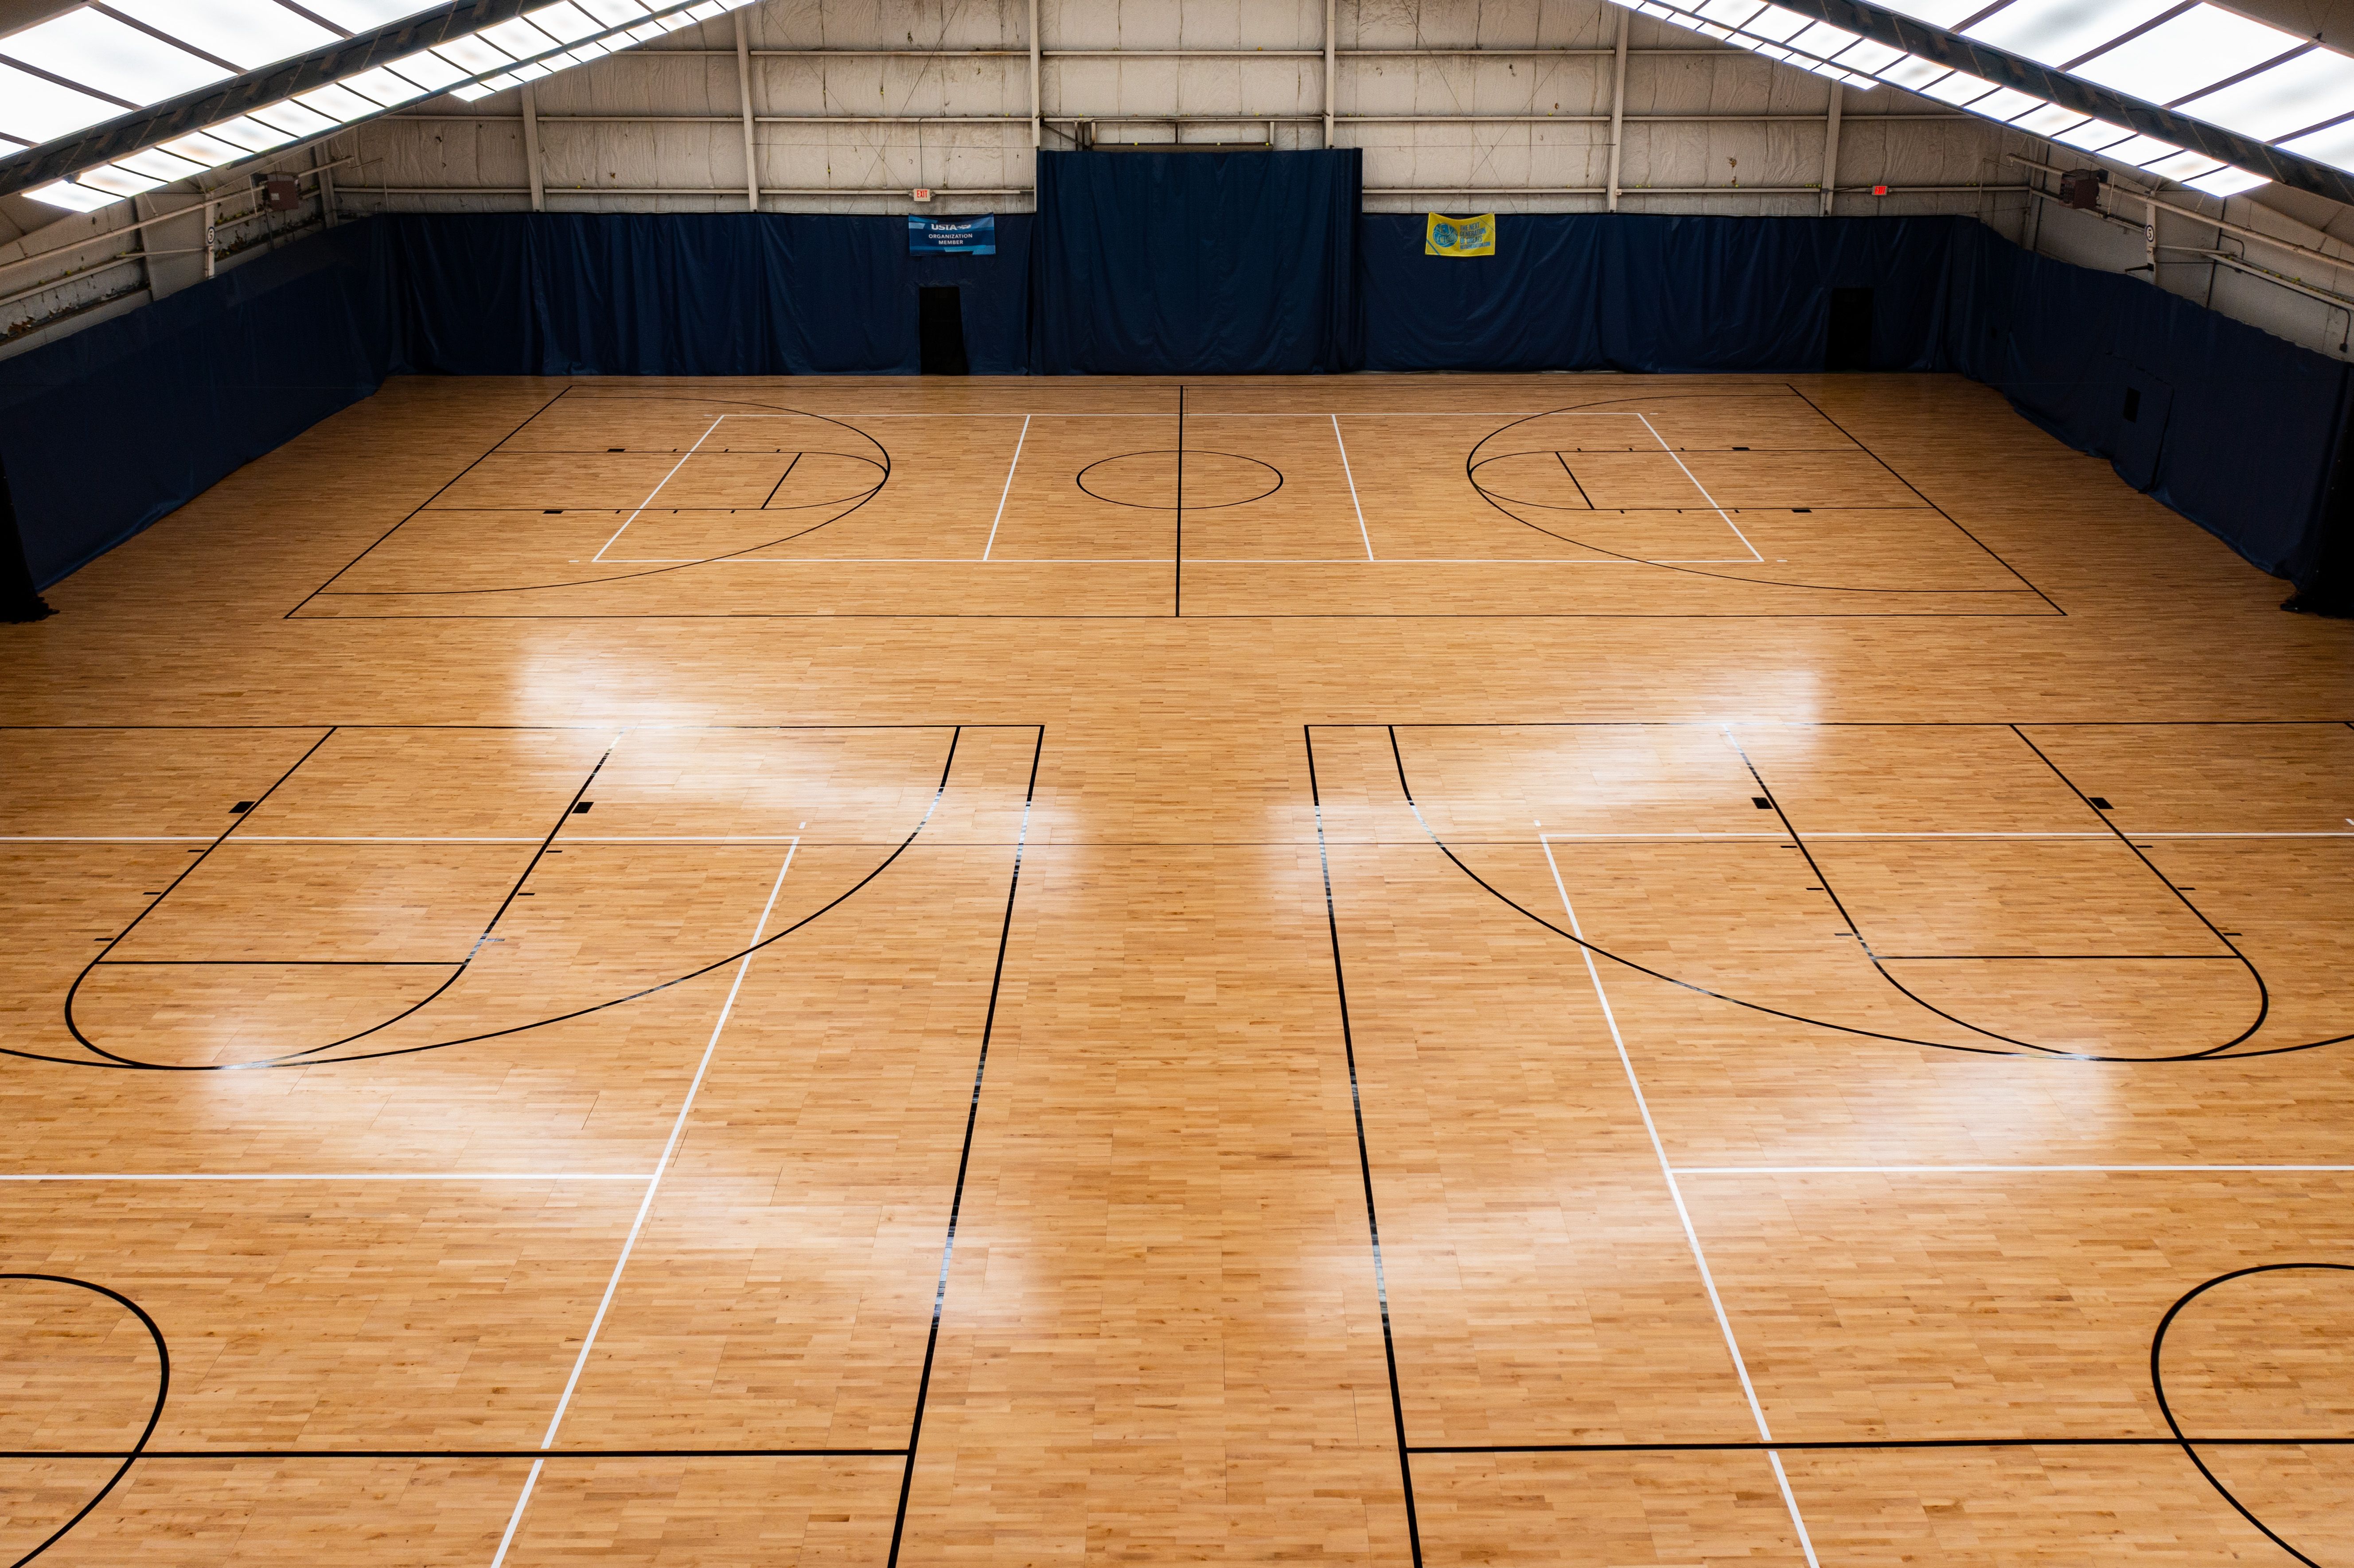 Grand Traverse Resorts Invests In Portable Sports Flooring, Will Host First Basketball Tournament This Weekend